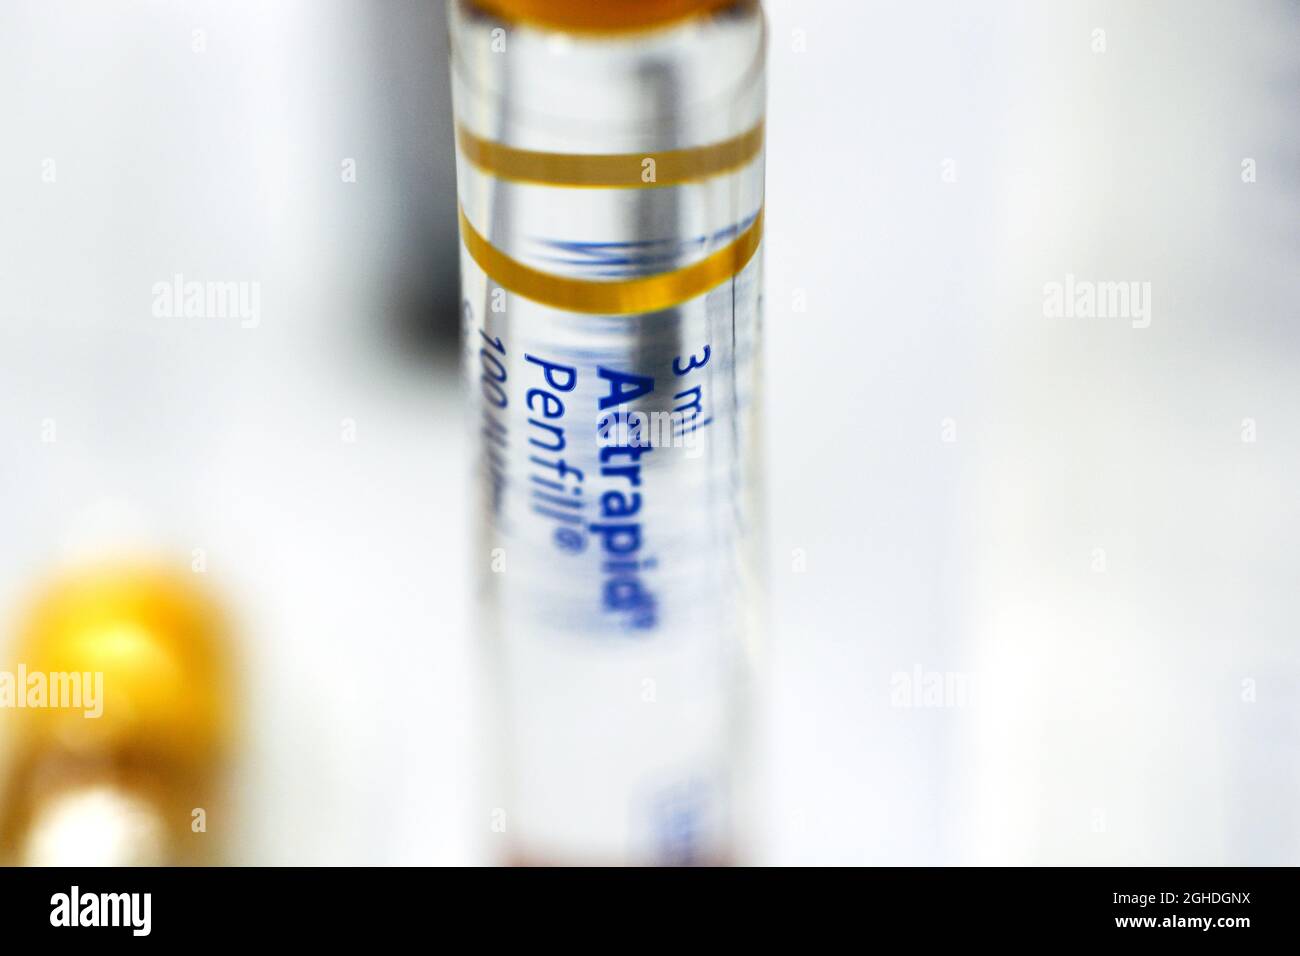 Actrapid human insulin rDNA penfill 100 IU solution for subcutaneous or intravenous injection in cartridge for use with Novo Nordisk devices Stock Photo